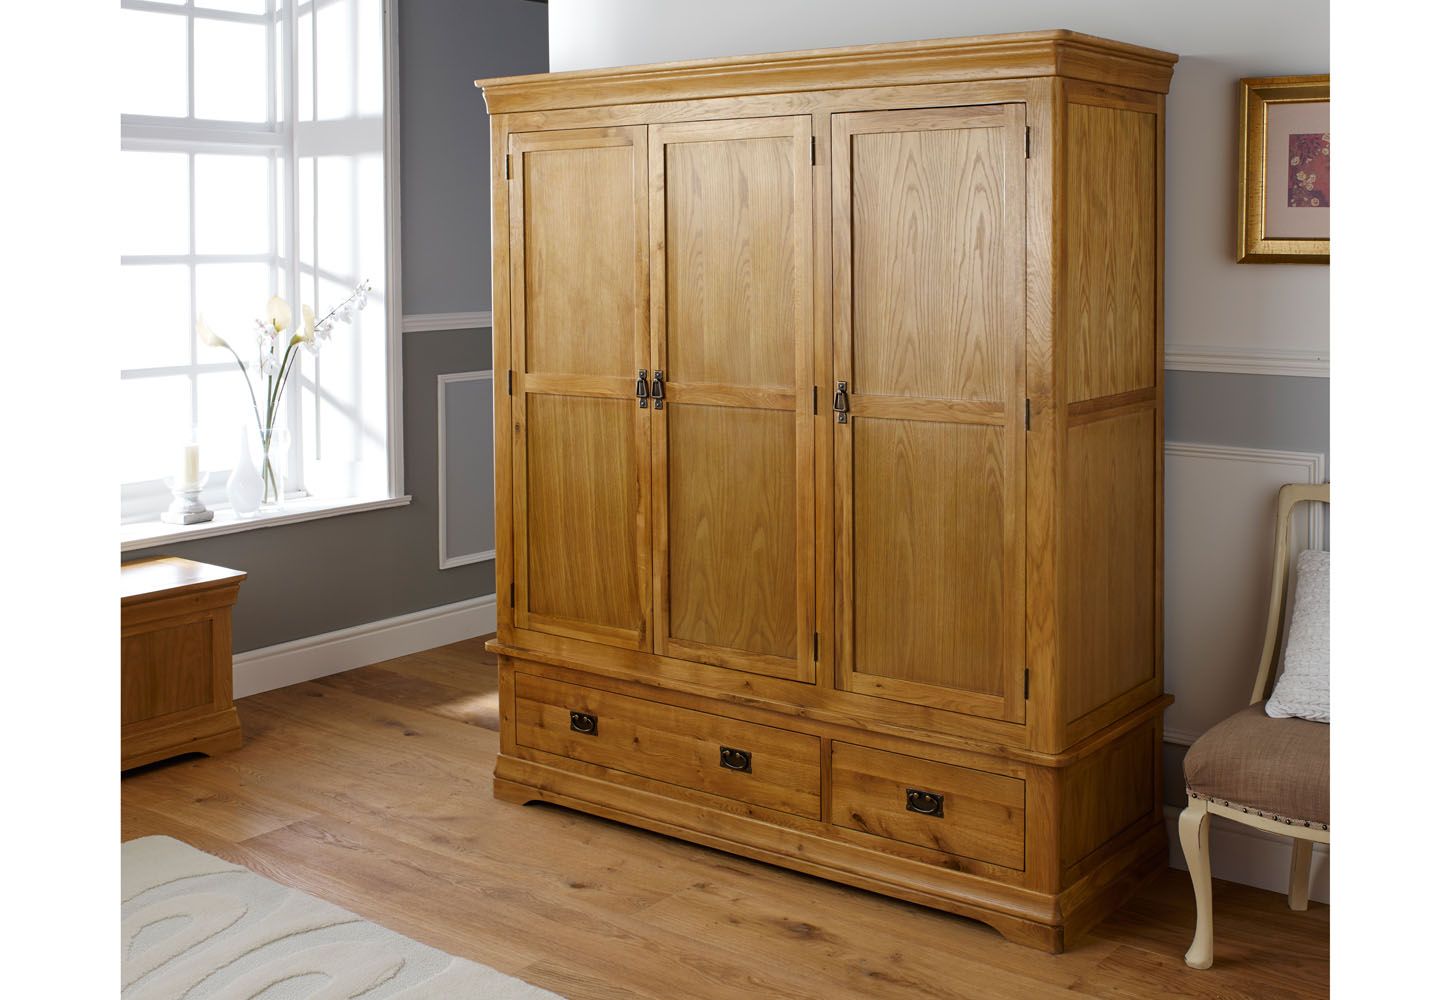 French Farmhouse Large Triple Oak Wardrobe – Free Delivery | Top Furniture Within Oak Wardrobes With Drawers And Shelves (View 5 of 15)